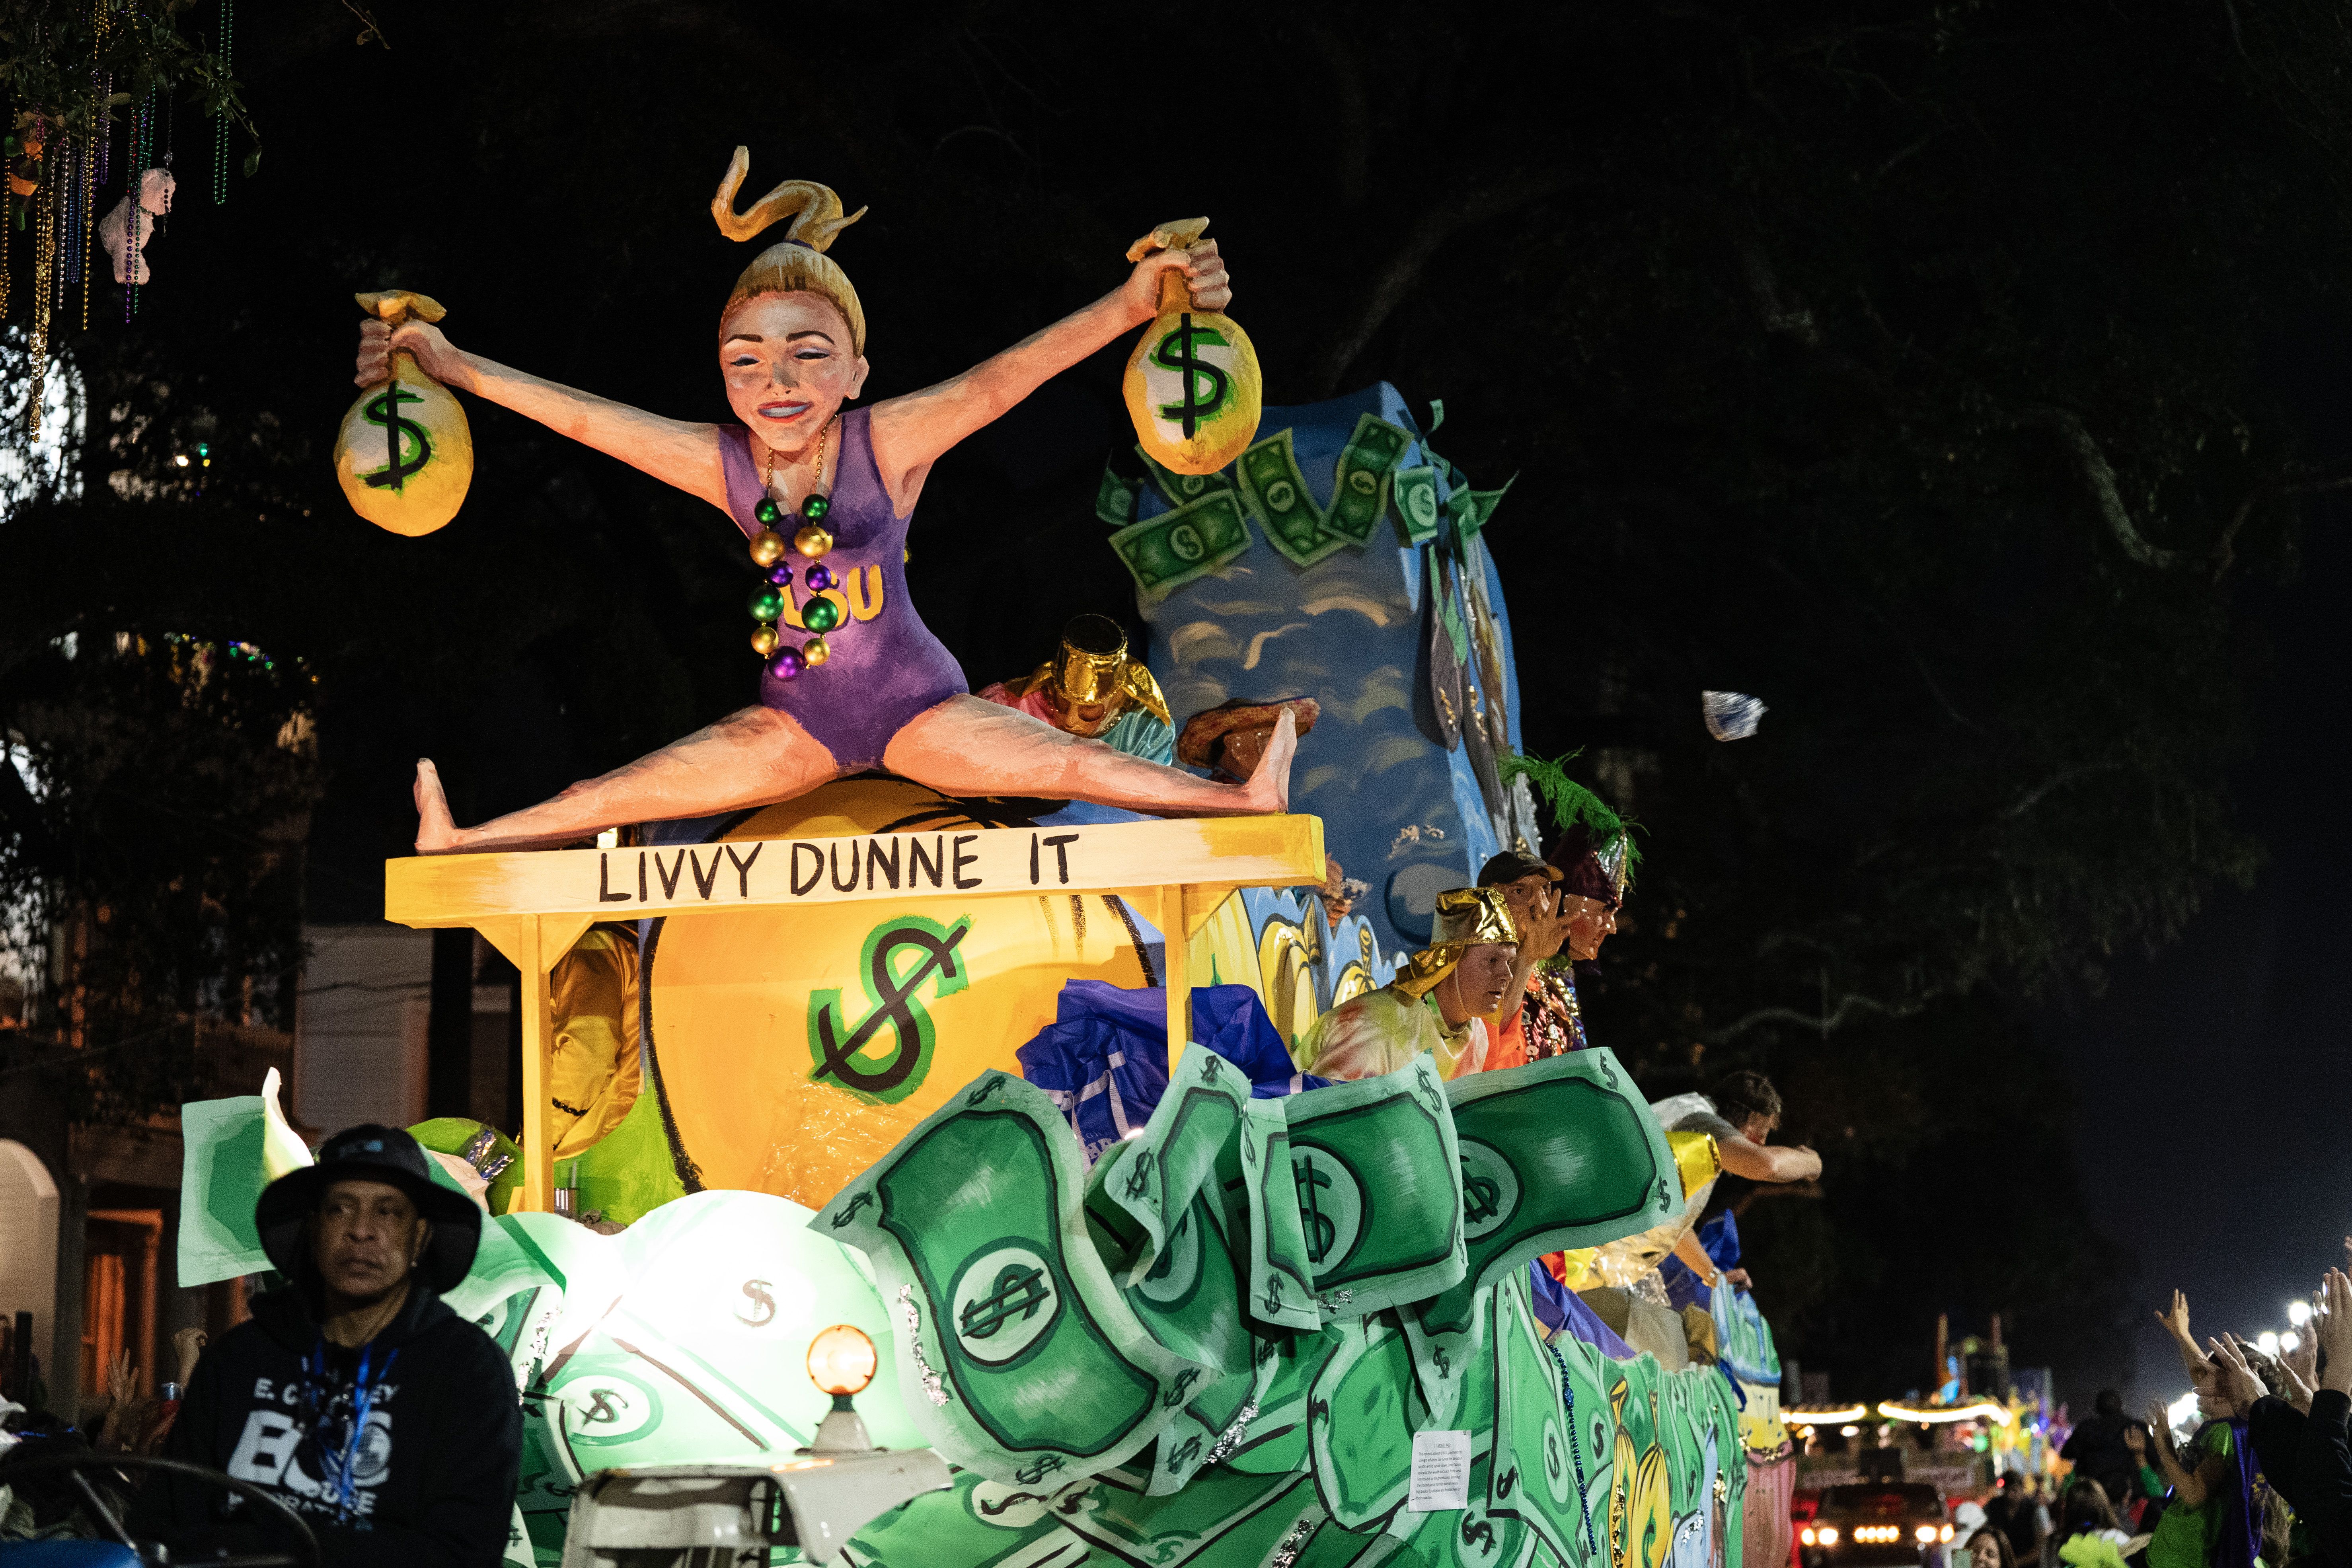 Photo shows an Olivia Dunne float in the Knights of Chaos parade